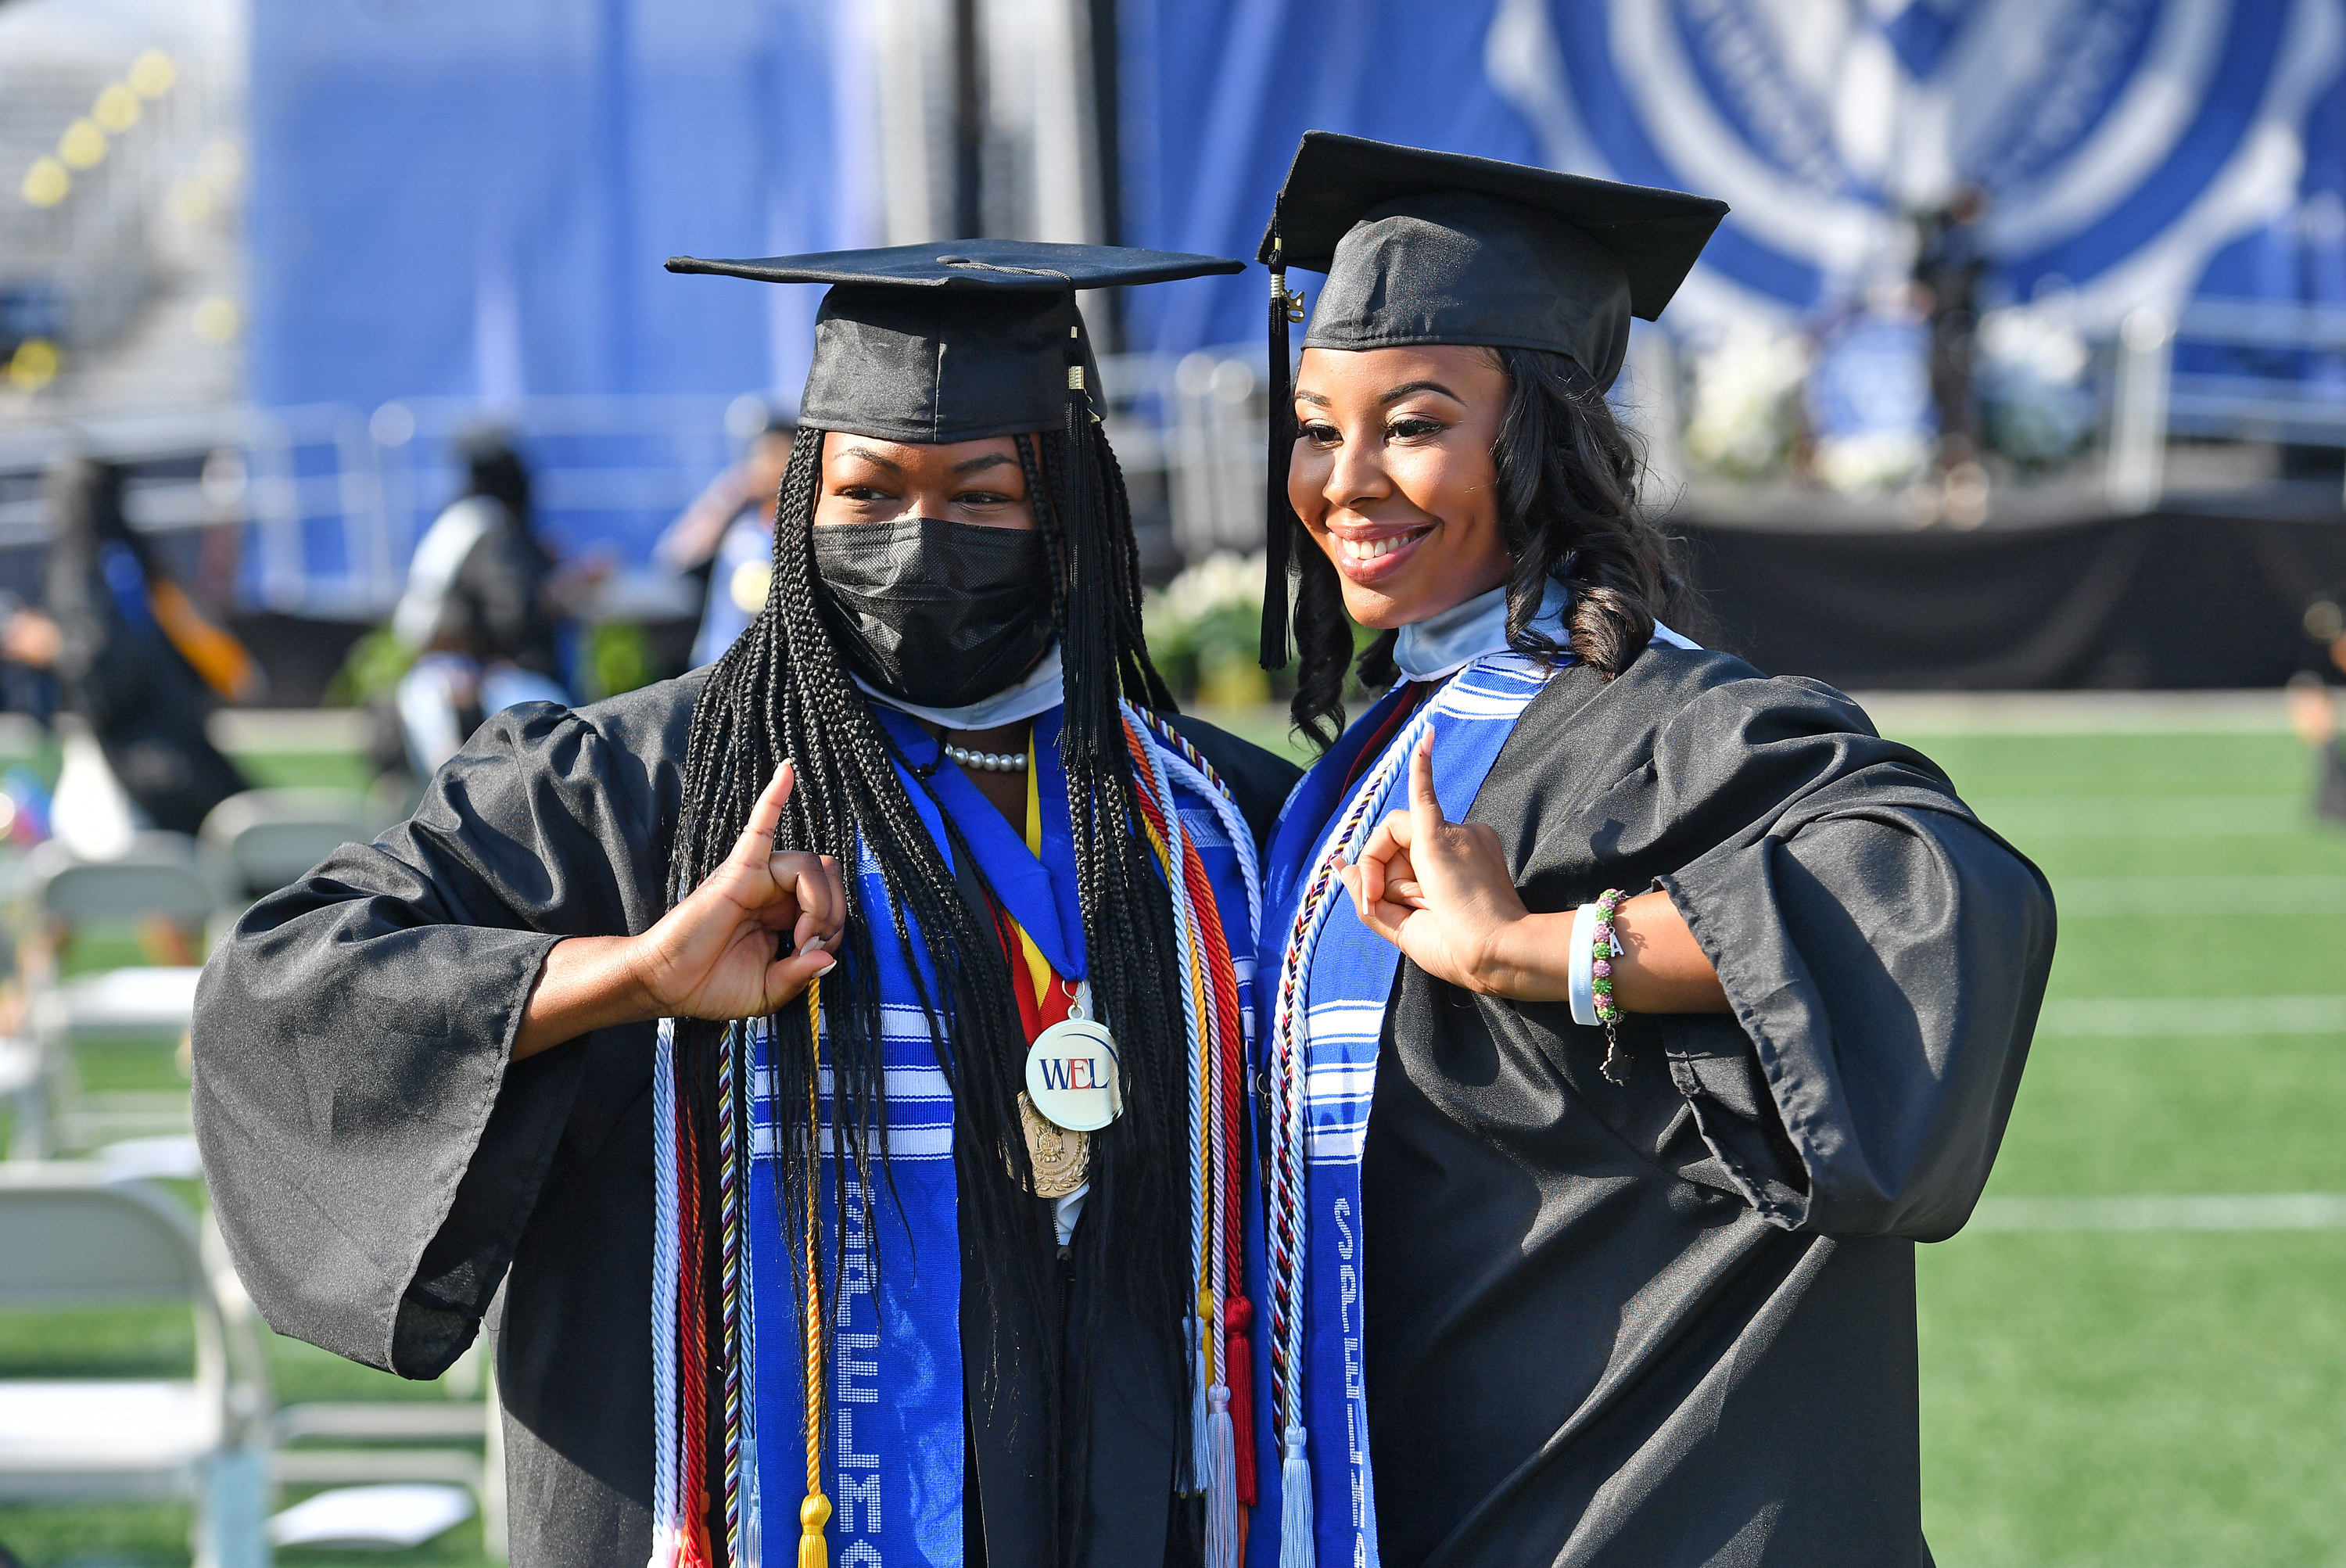 two female students posing in their graduation gowns